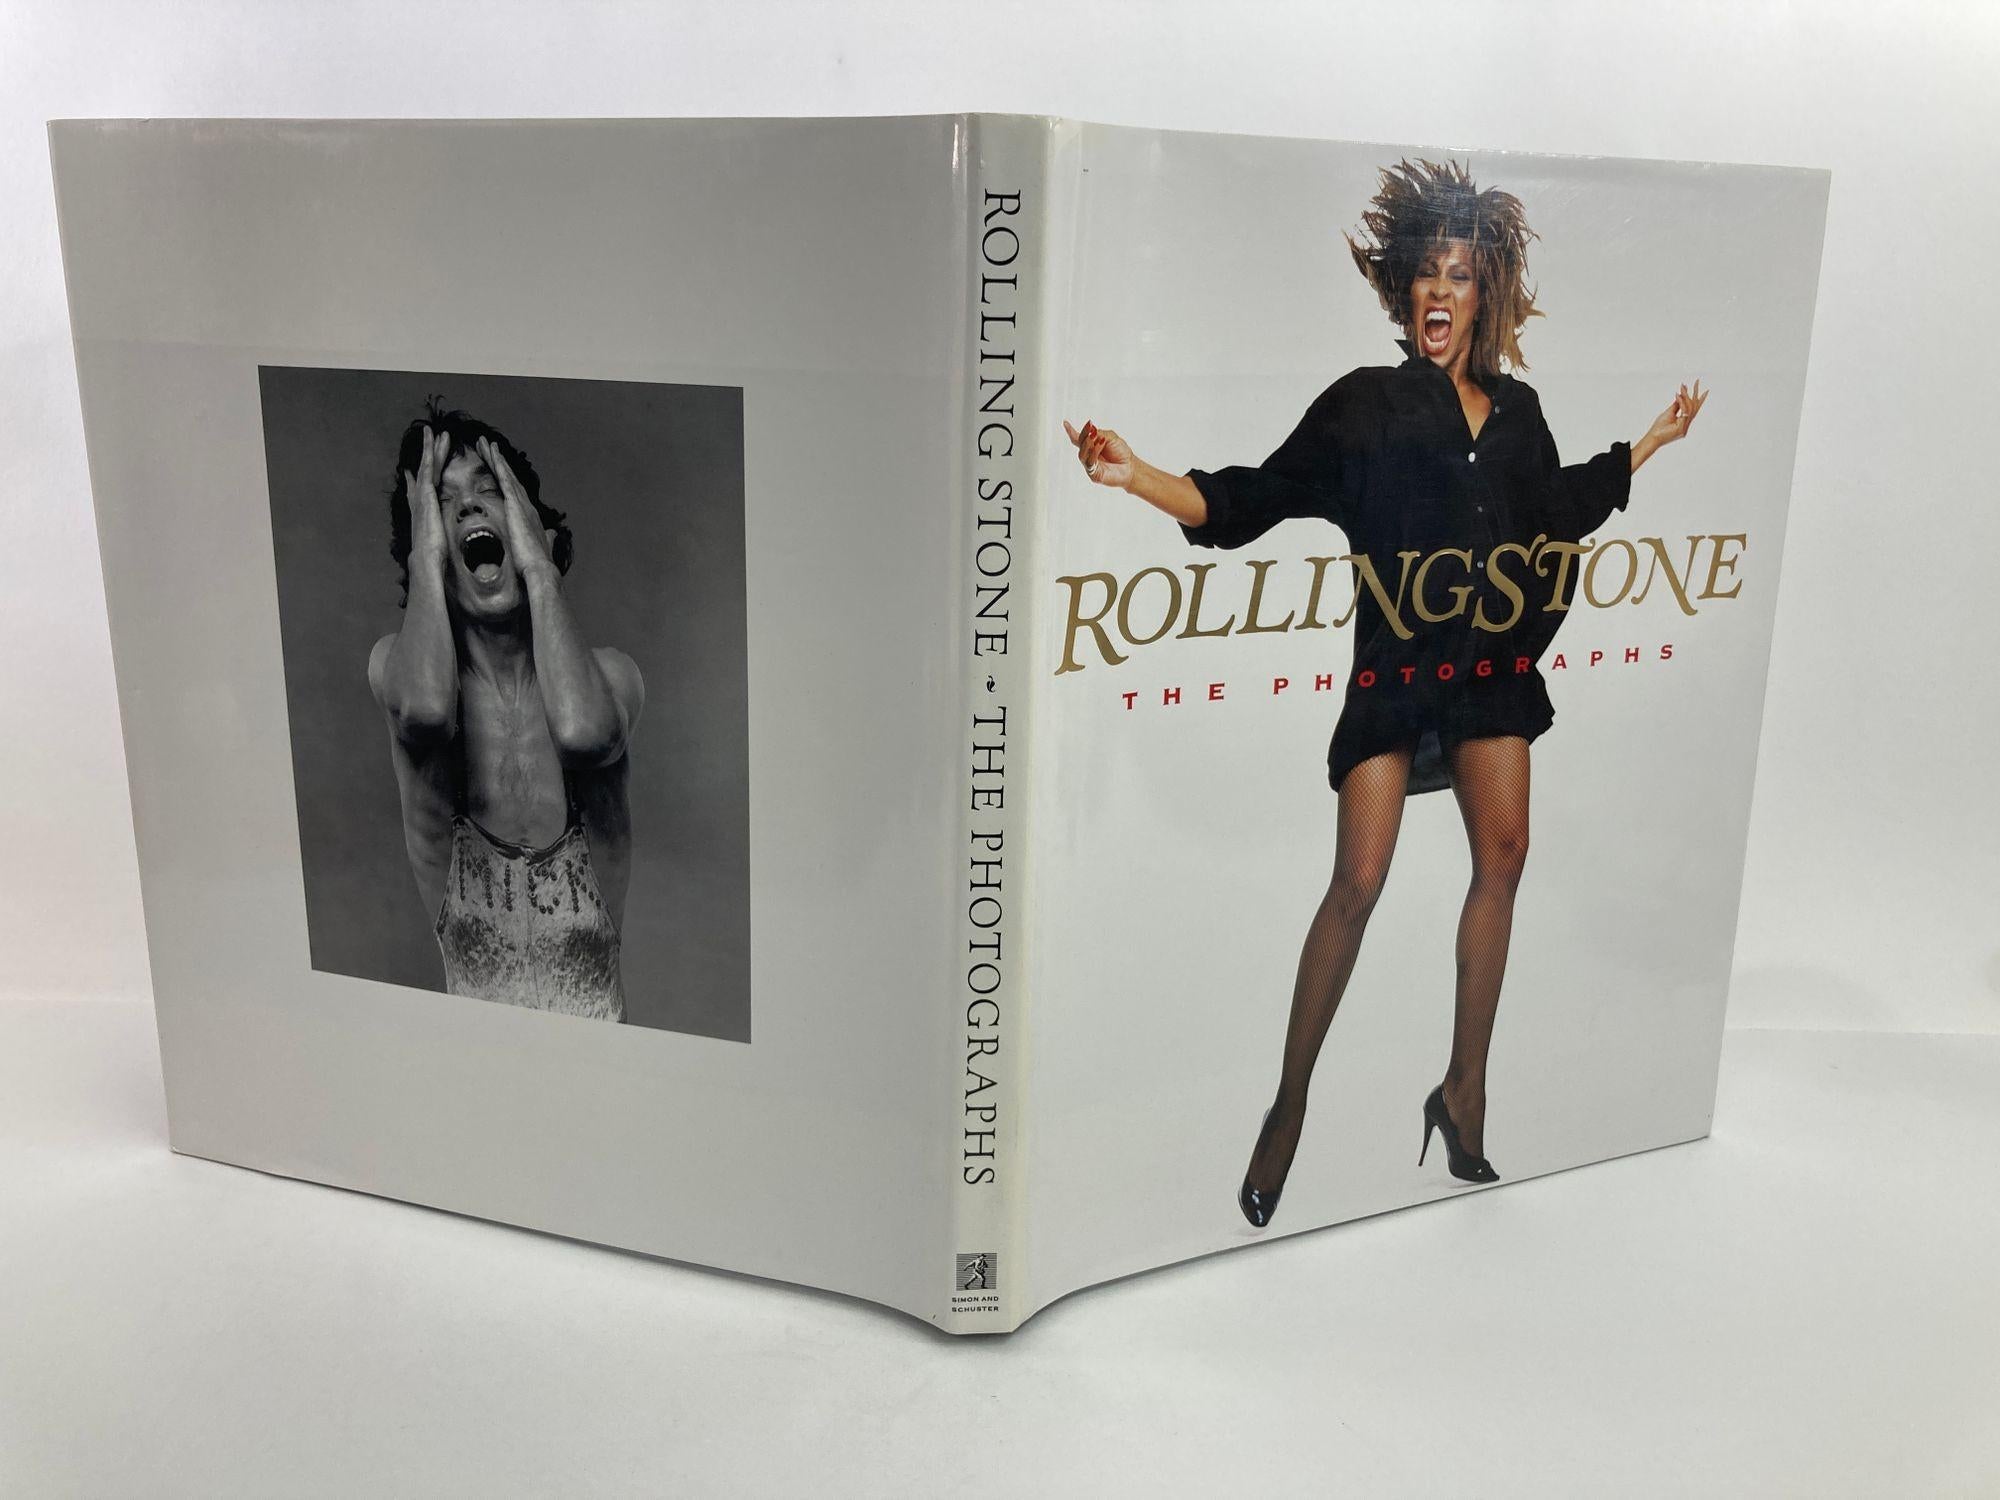 Rolling Stones the Photographs 1989 Hardcover.
1st edition, 1st printing.
Taken between 1967 and the present, these 150 pictures by 35 photographers are reprinted from Rolling Stone.
Tina Turner is one of the famous faces of rock. This great